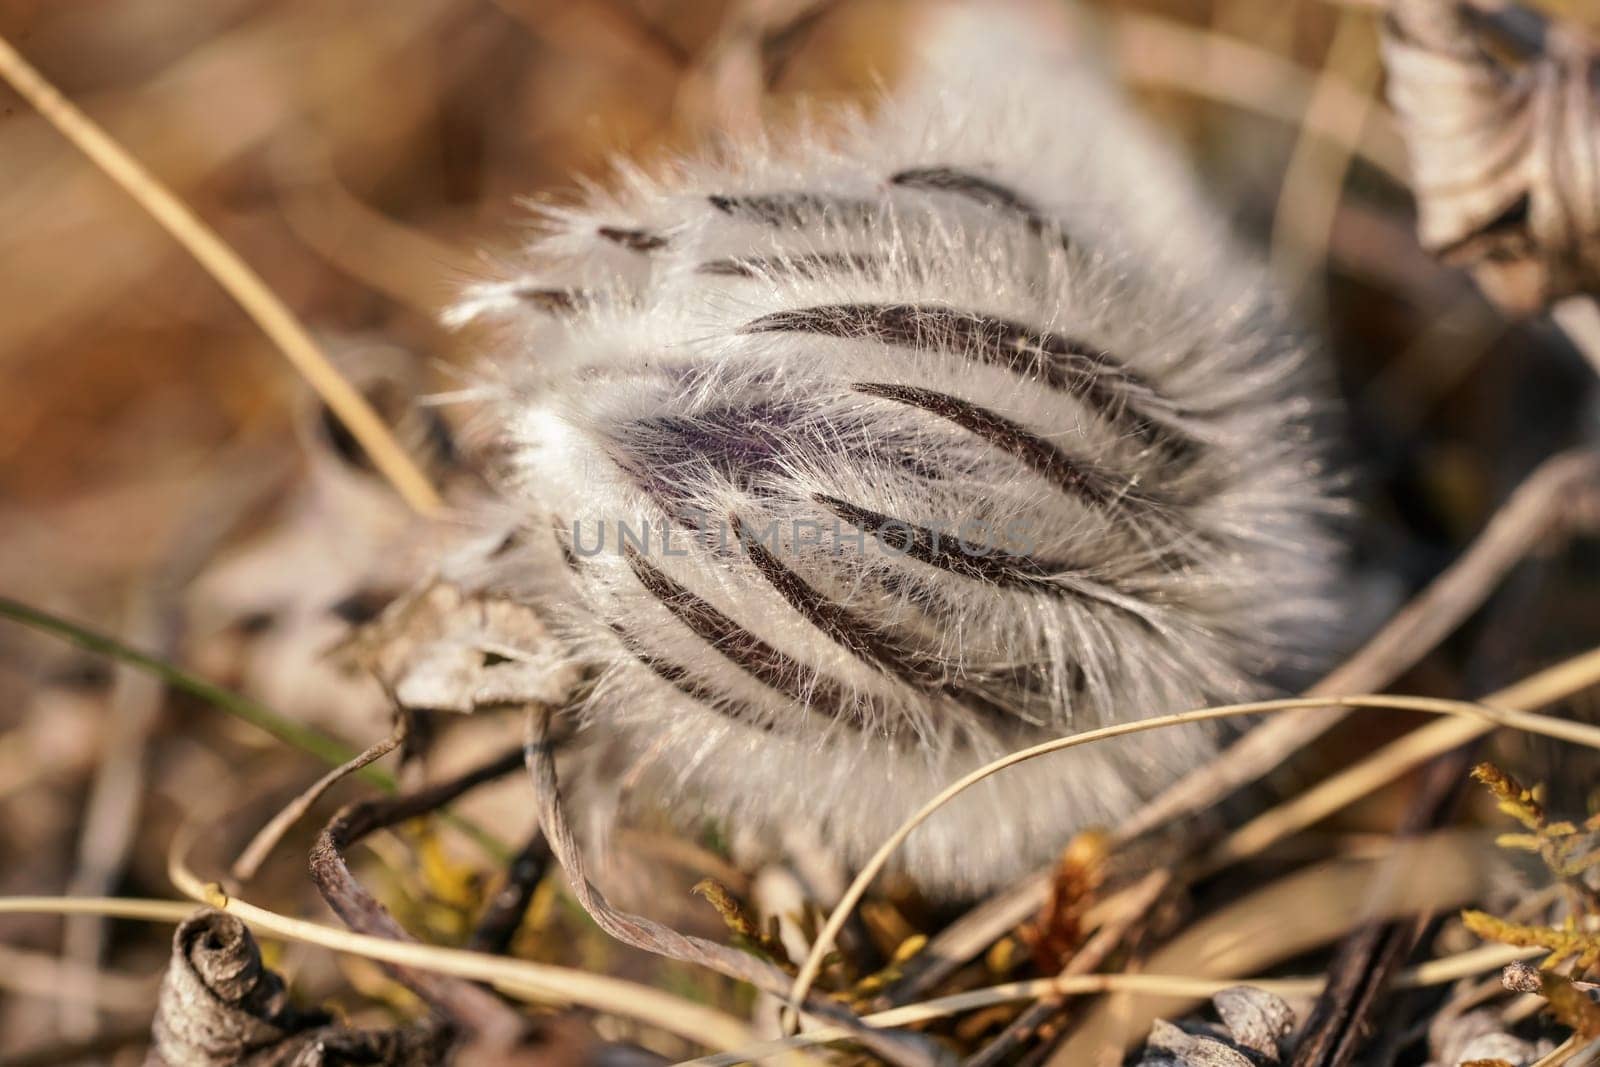 Purple greater pasque flower - Pulsatilla grandis - growing in dry grass, close up detail on hairy unopened plant head by Ivanko